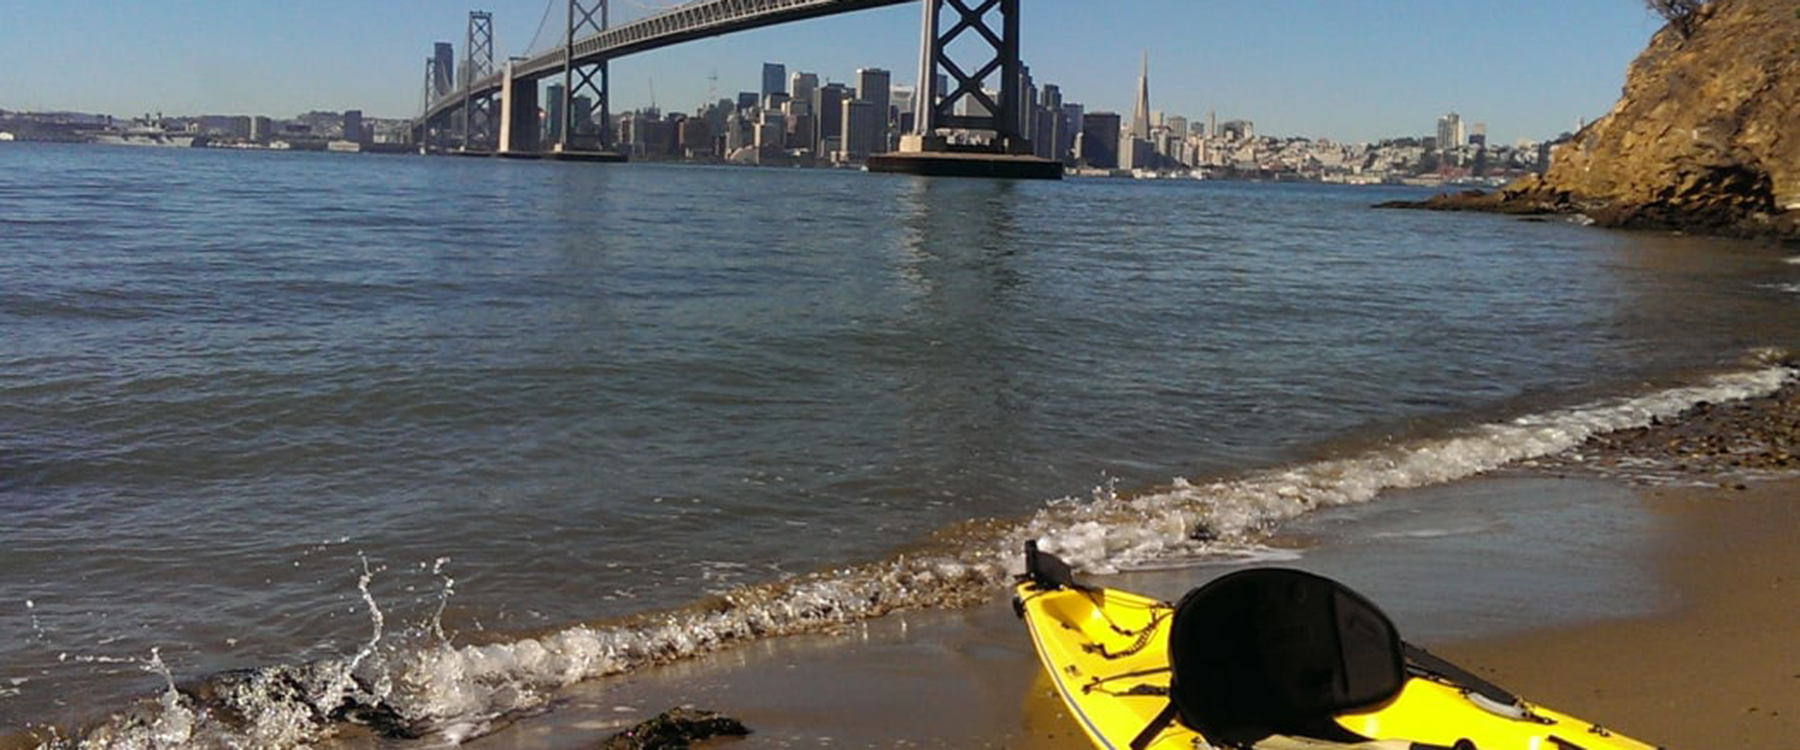 paddling in the Bay Area